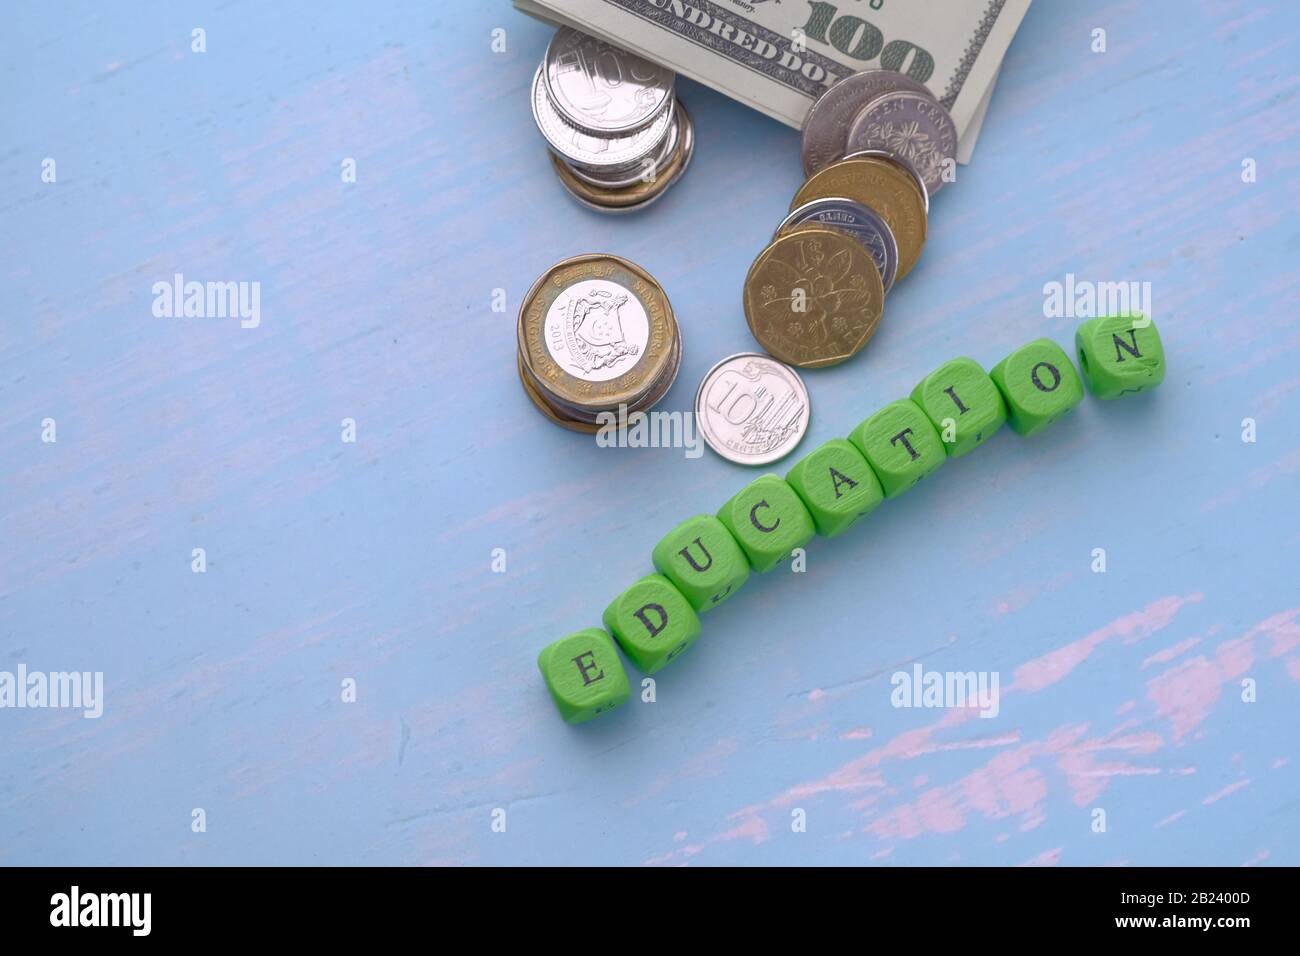 top view of education text and coin on table. saving money for education concept Stock Photo